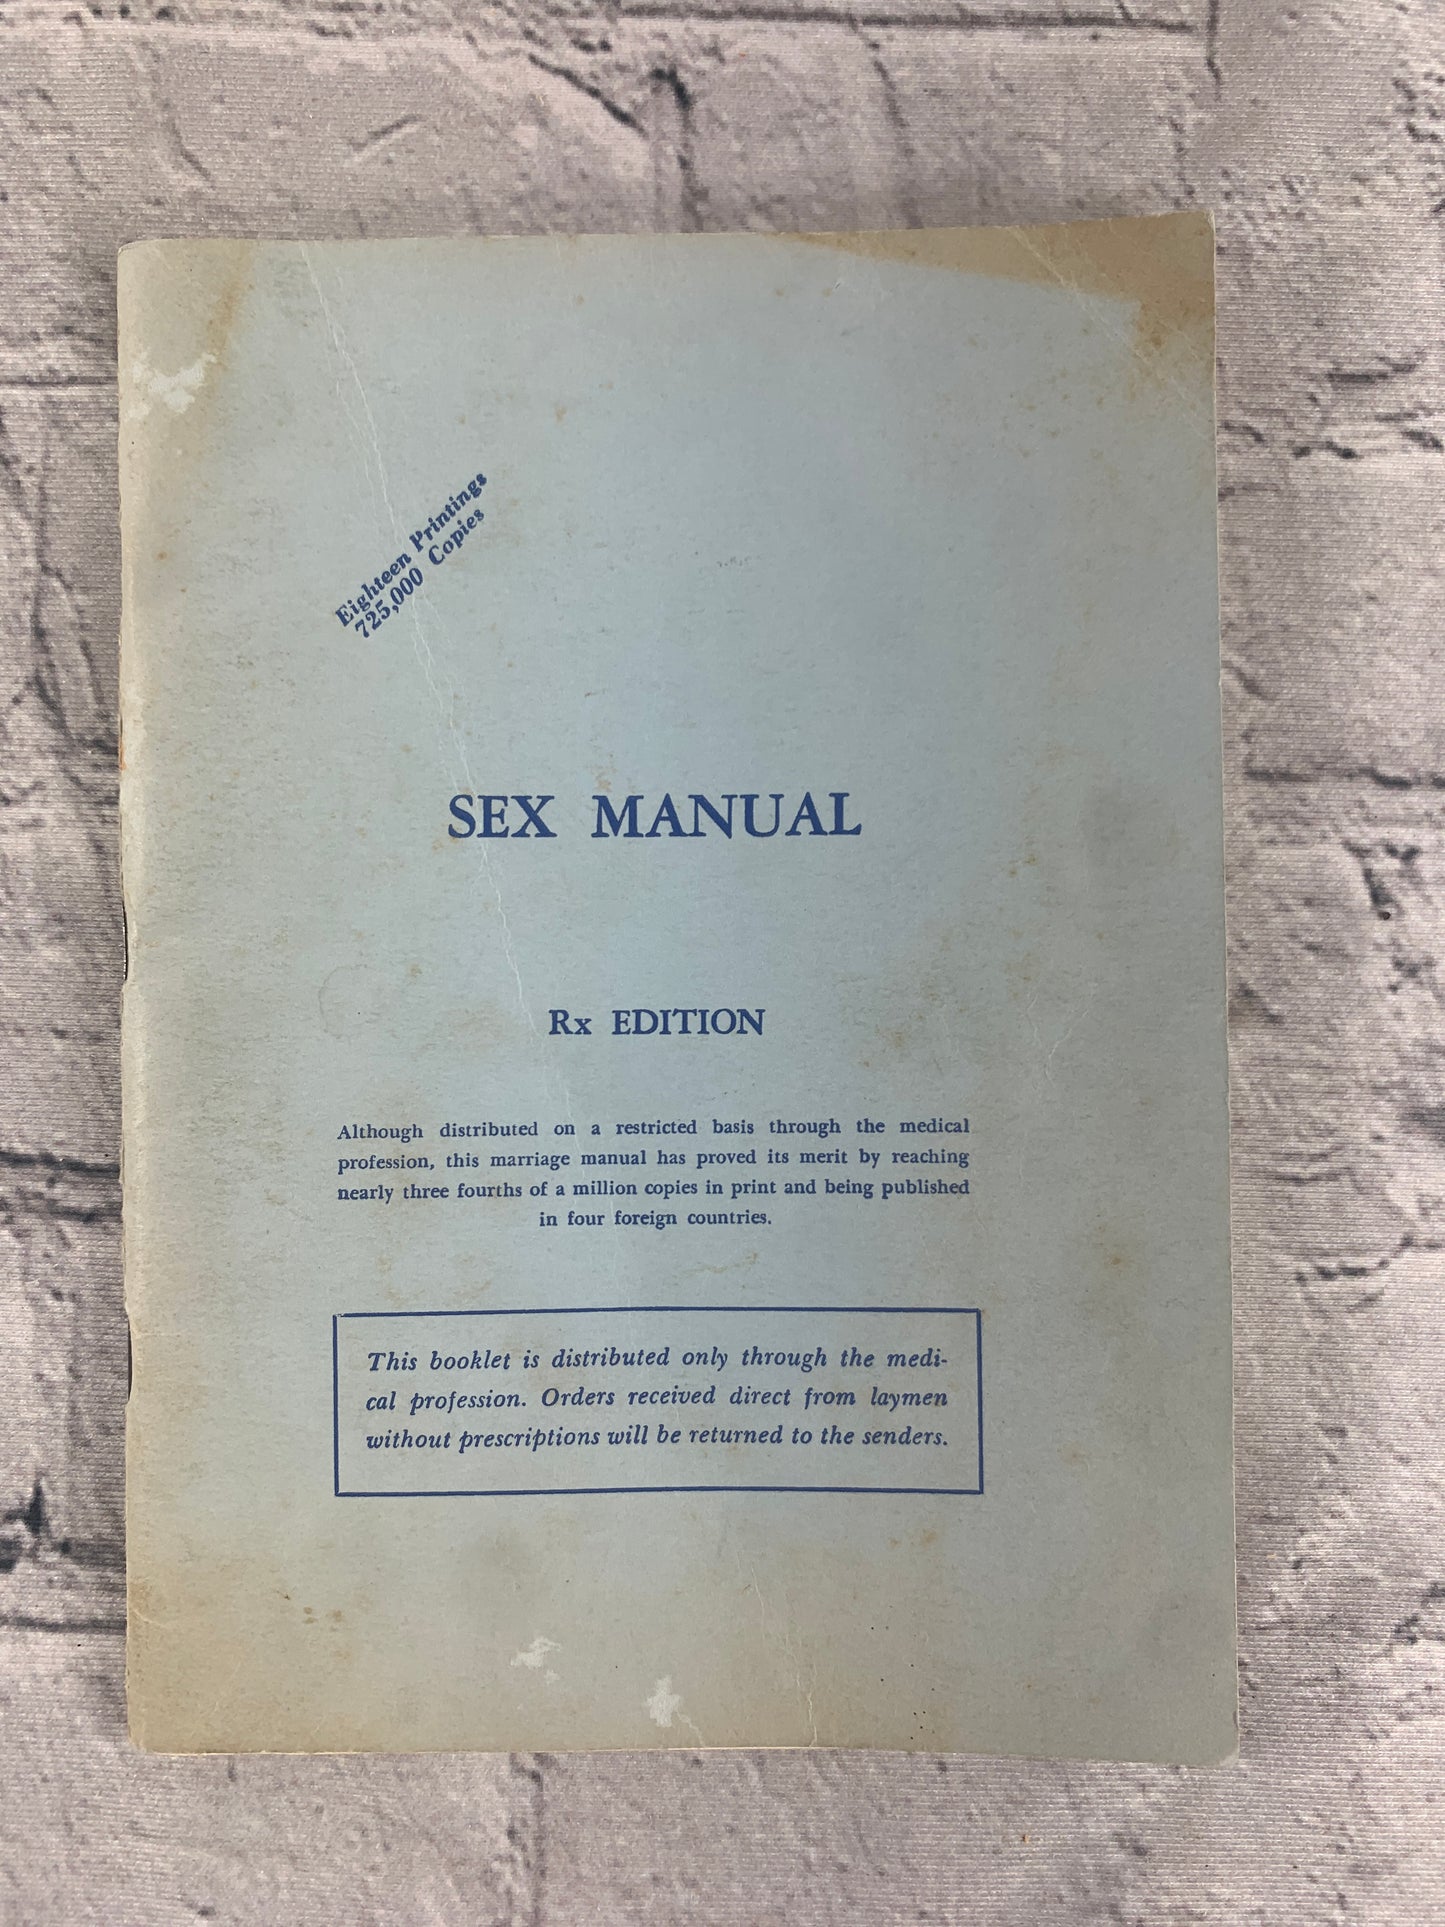 Sex Manual for Those Married or About to be by Kelly [Rx Edition · 1956]